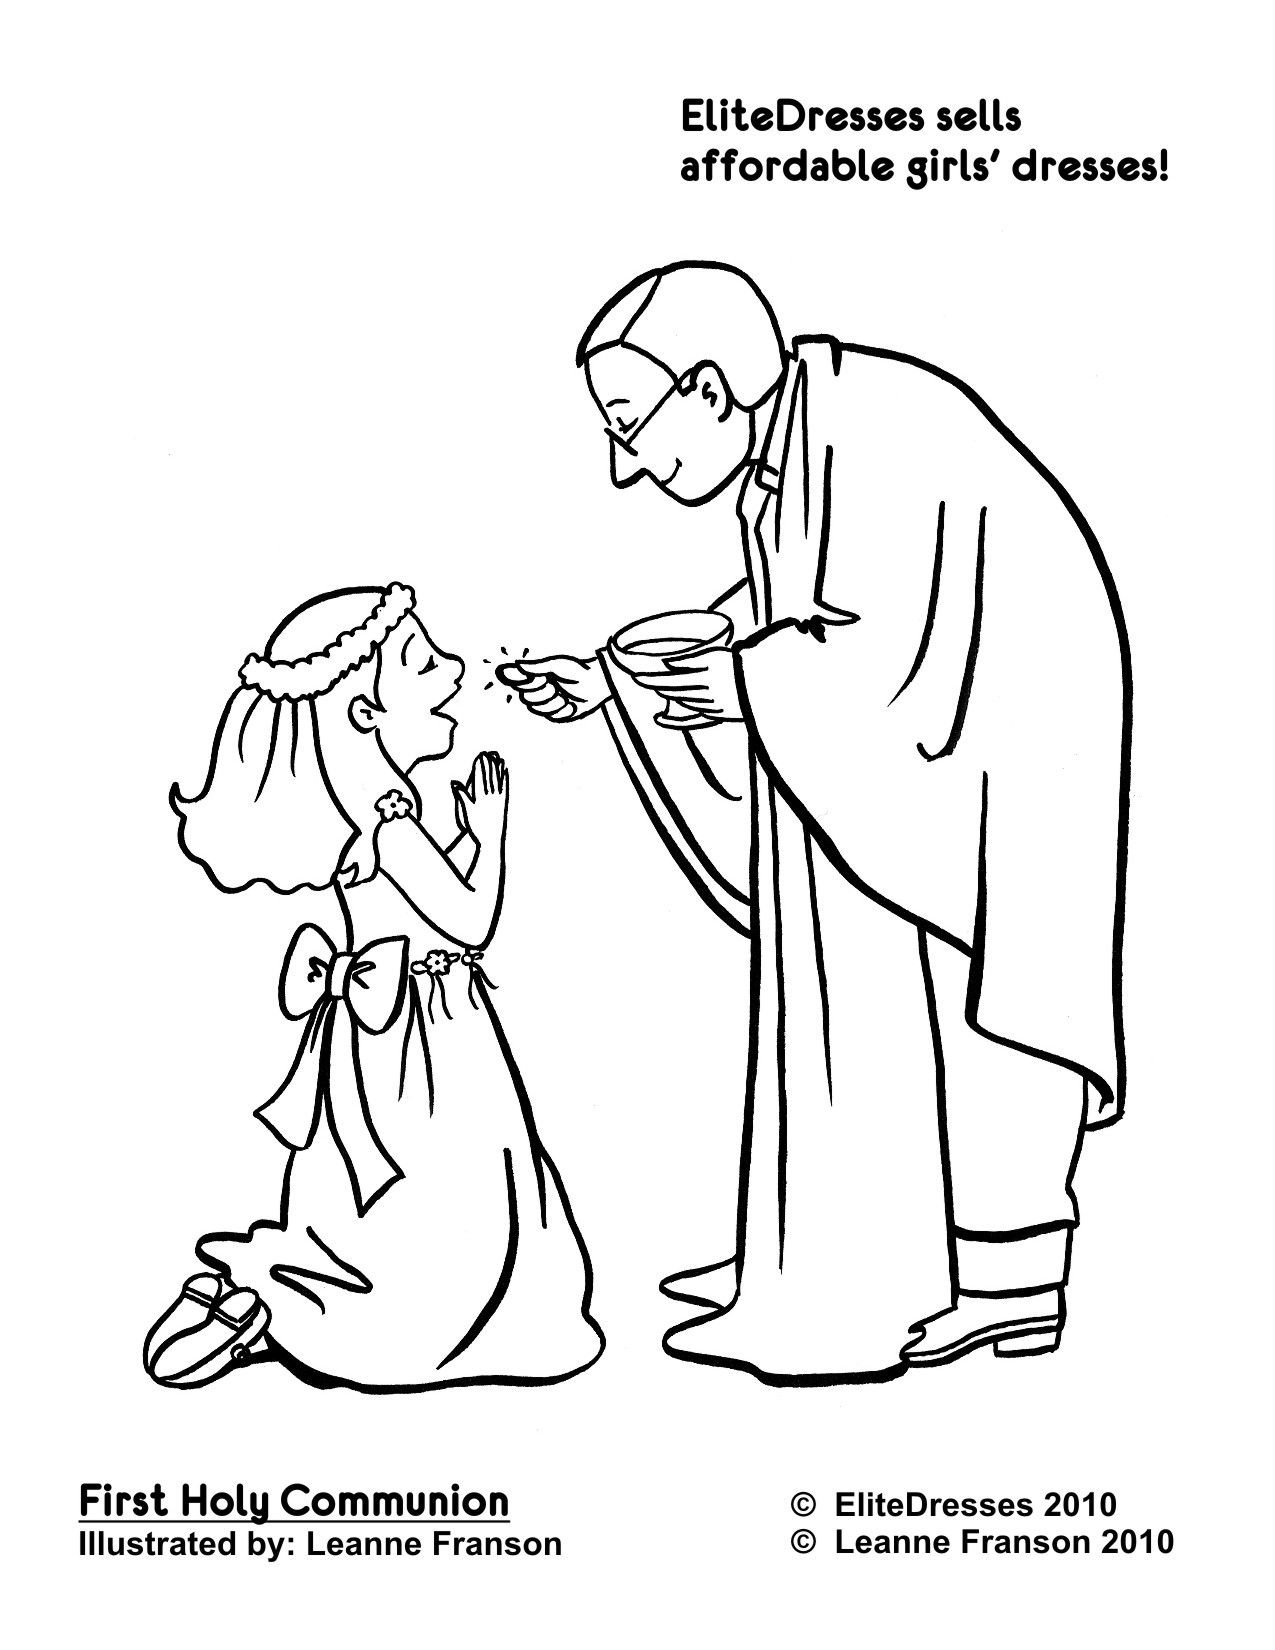 First Communion Dress Coloring Pages - Free and Printable | Communion,  First communion banner, Catholic coloring